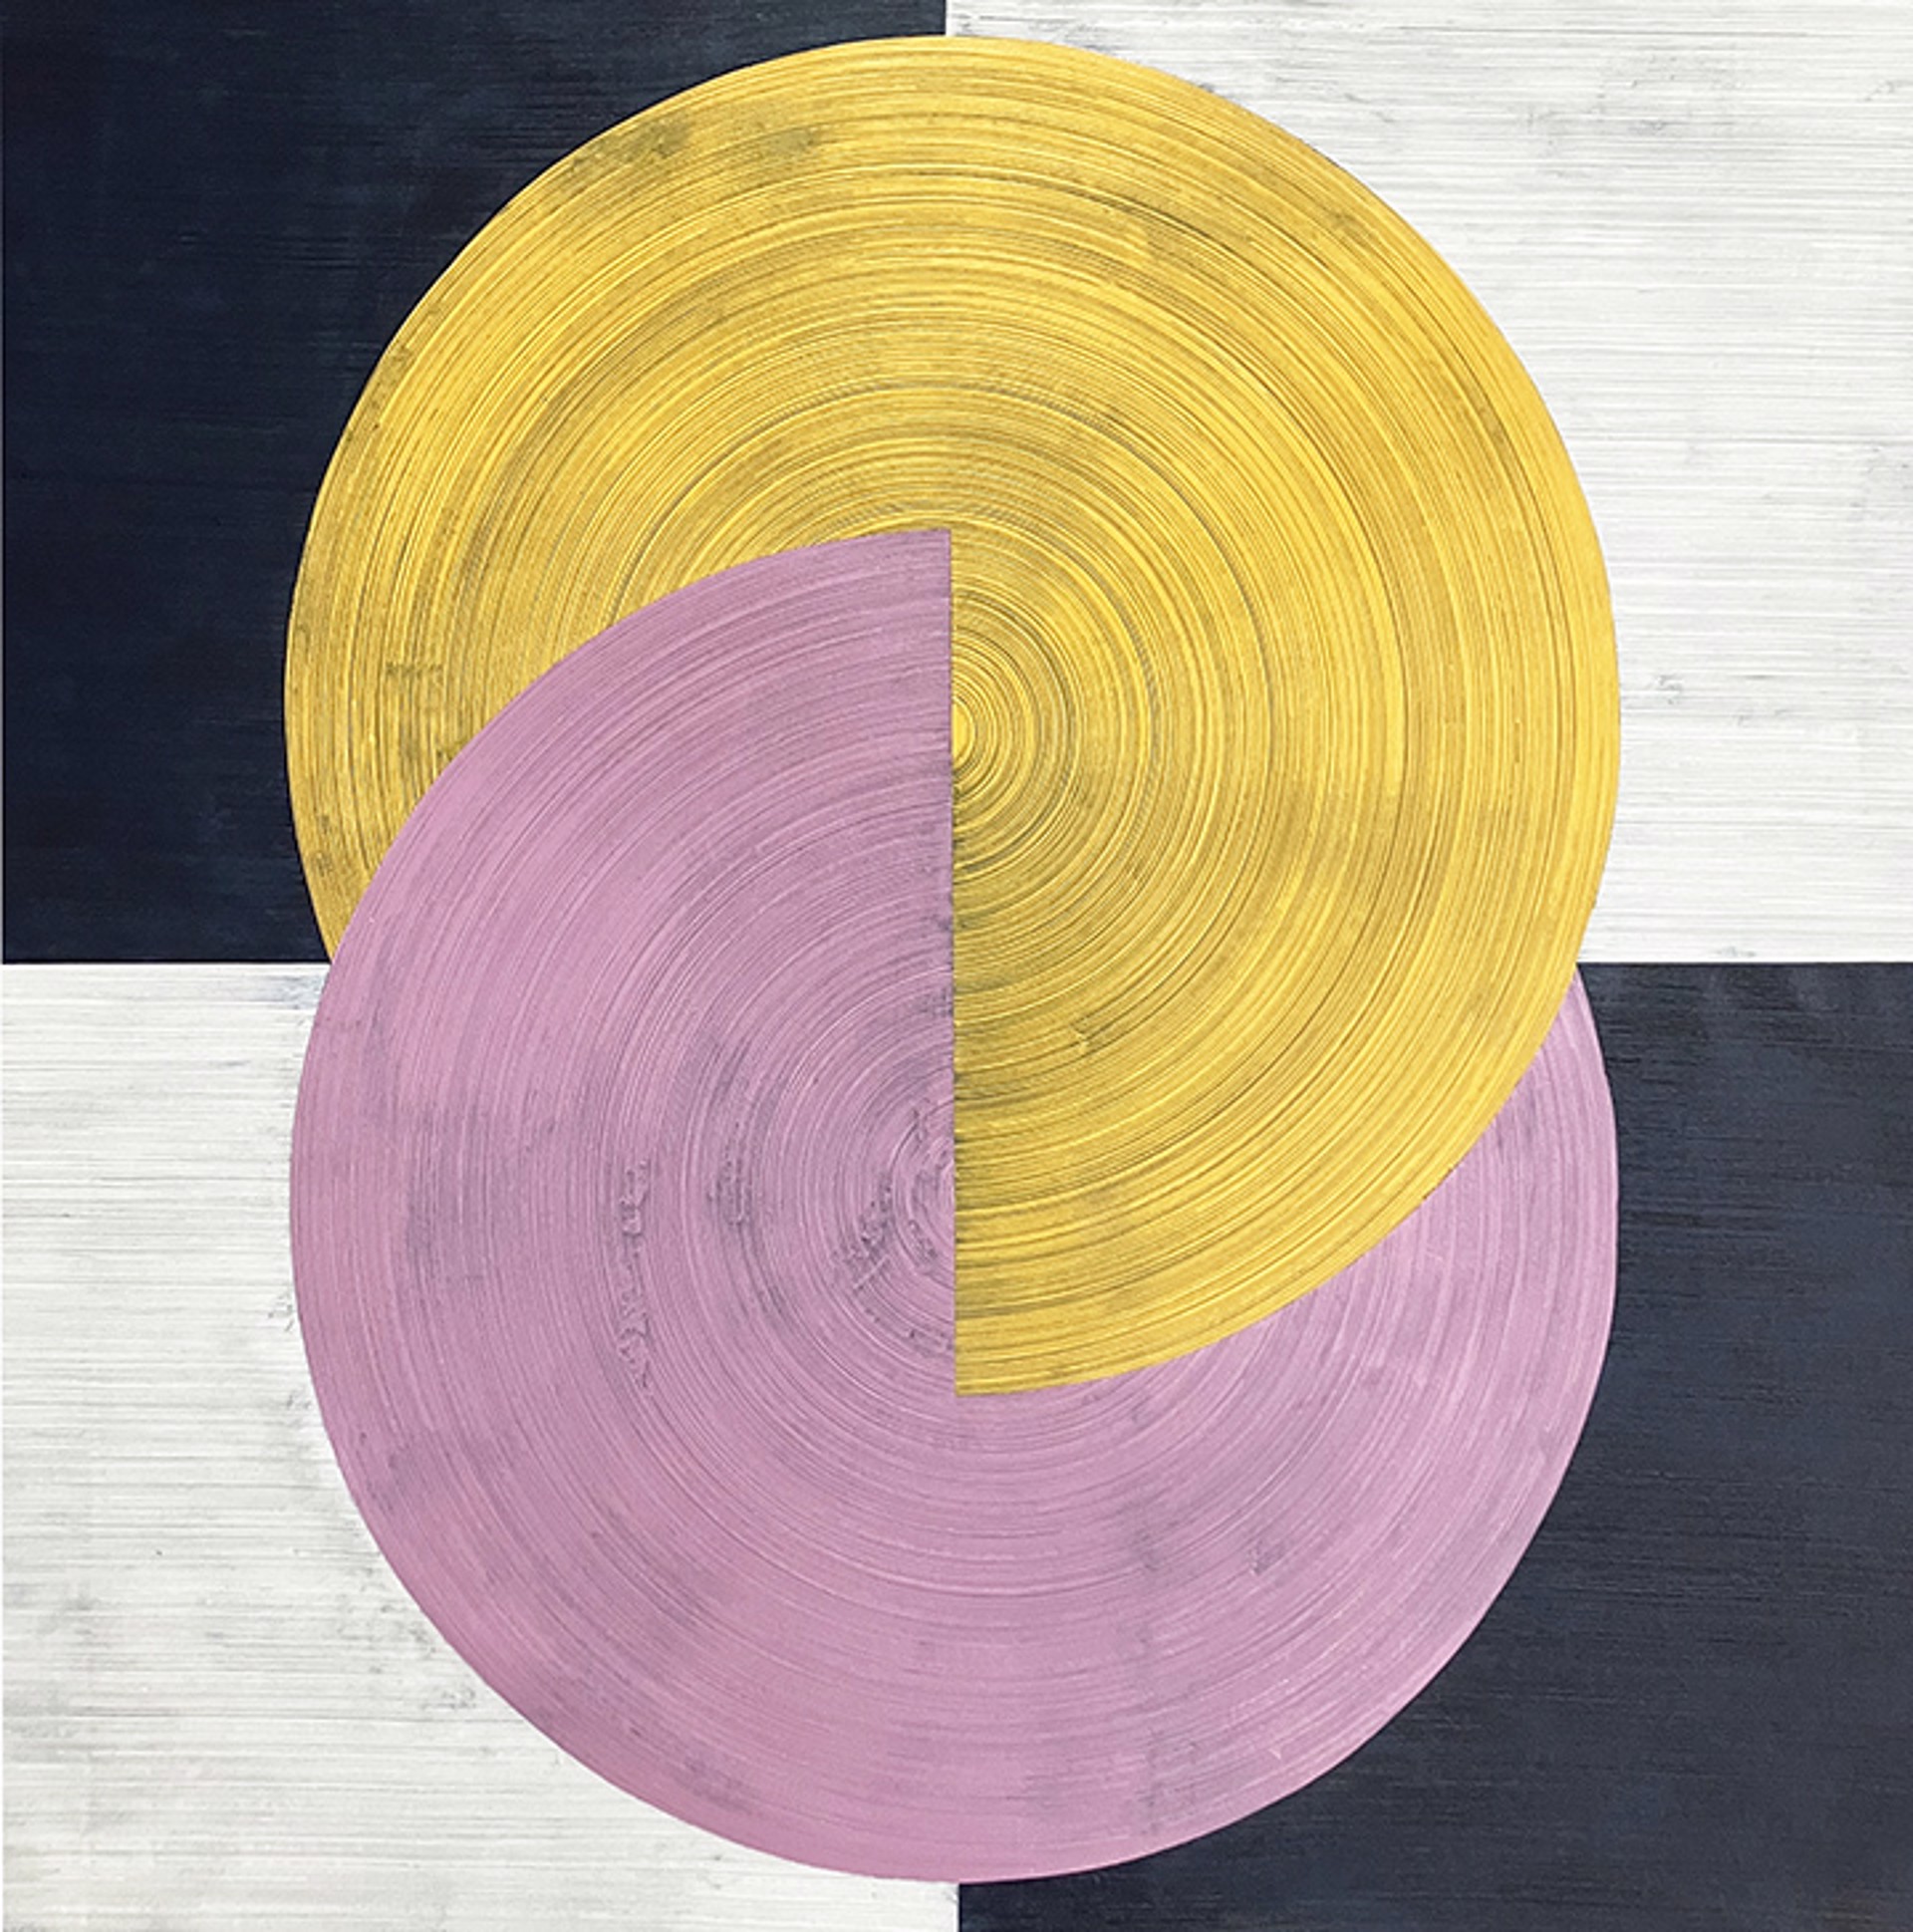 A Harmonia painting featuring yellow and pink circles with hints of black.